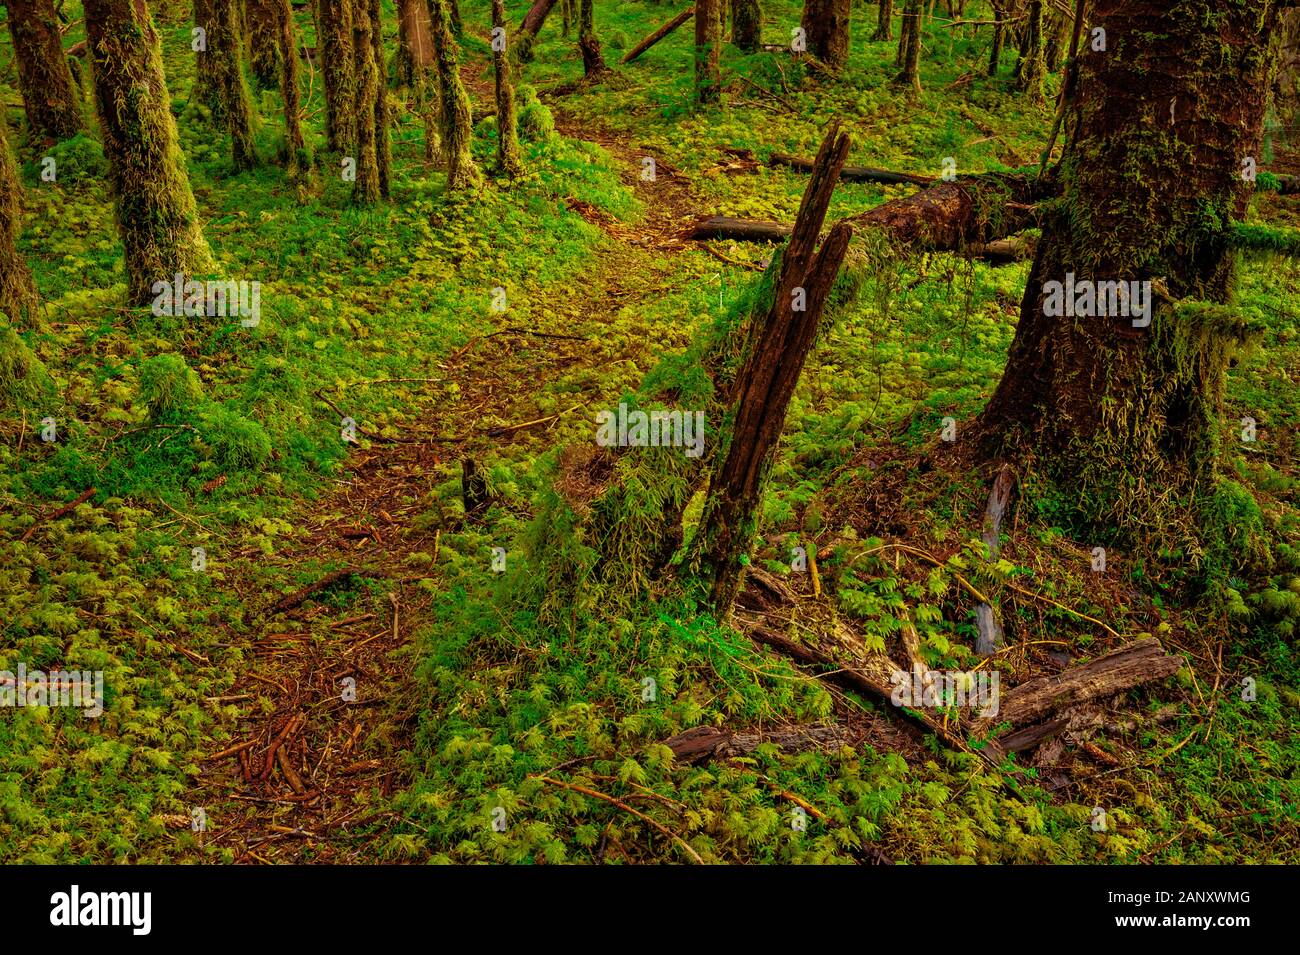 Foot trail through moss cover primal forest near Sitka, Alaska, USA. Stock Photo